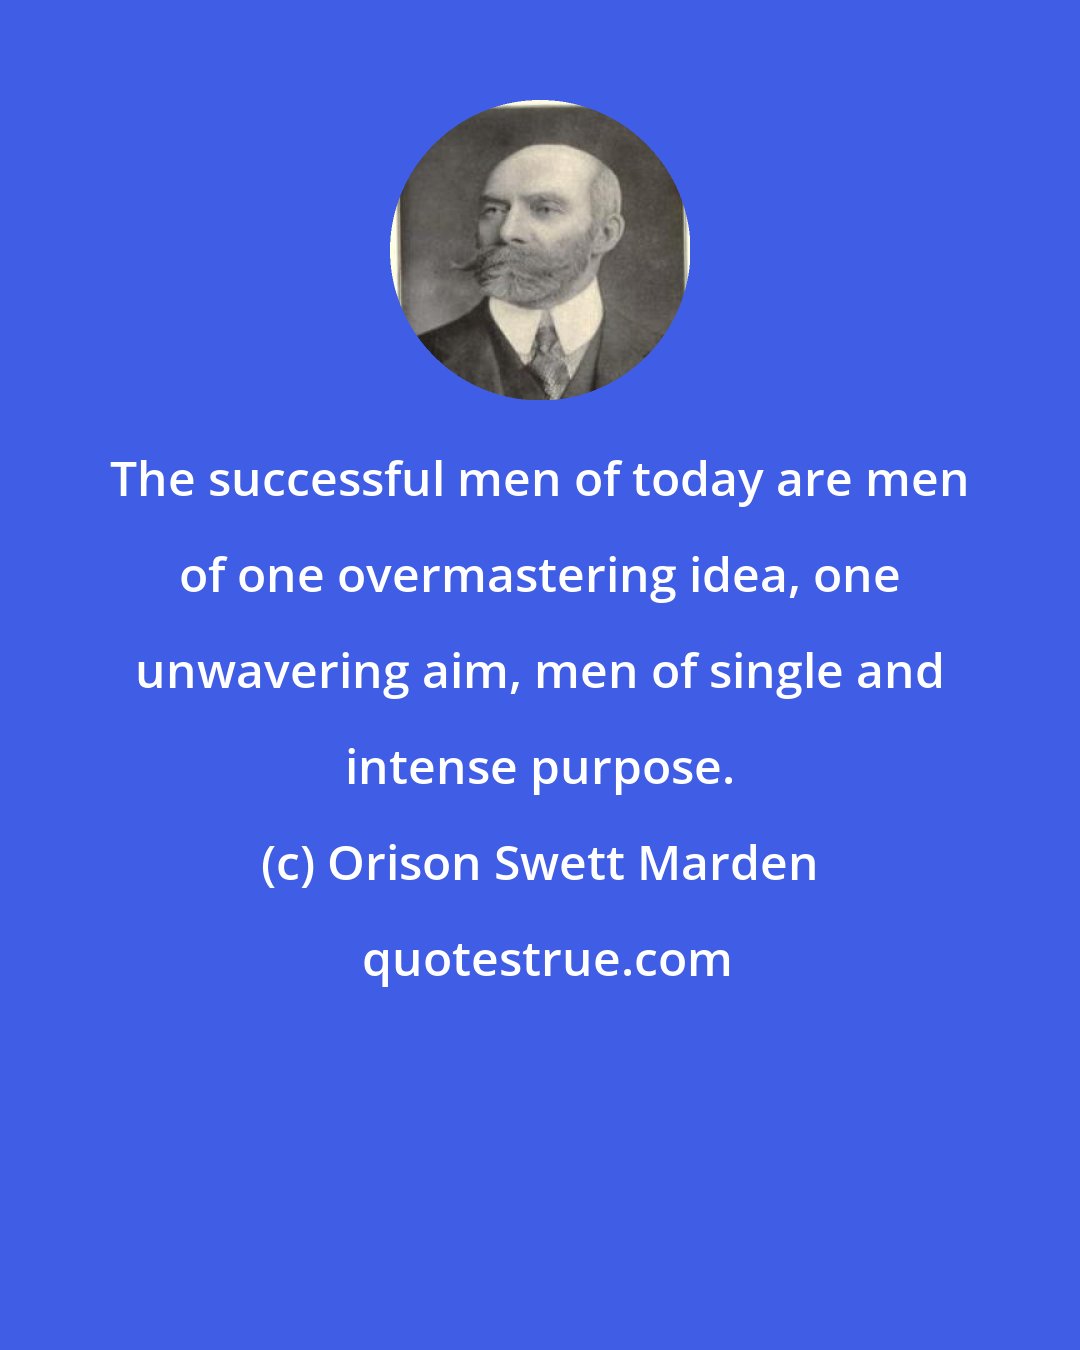 Orison Swett Marden: The successful men of today are men of one overmastering idea, one unwavering aim, men of single and intense purpose.